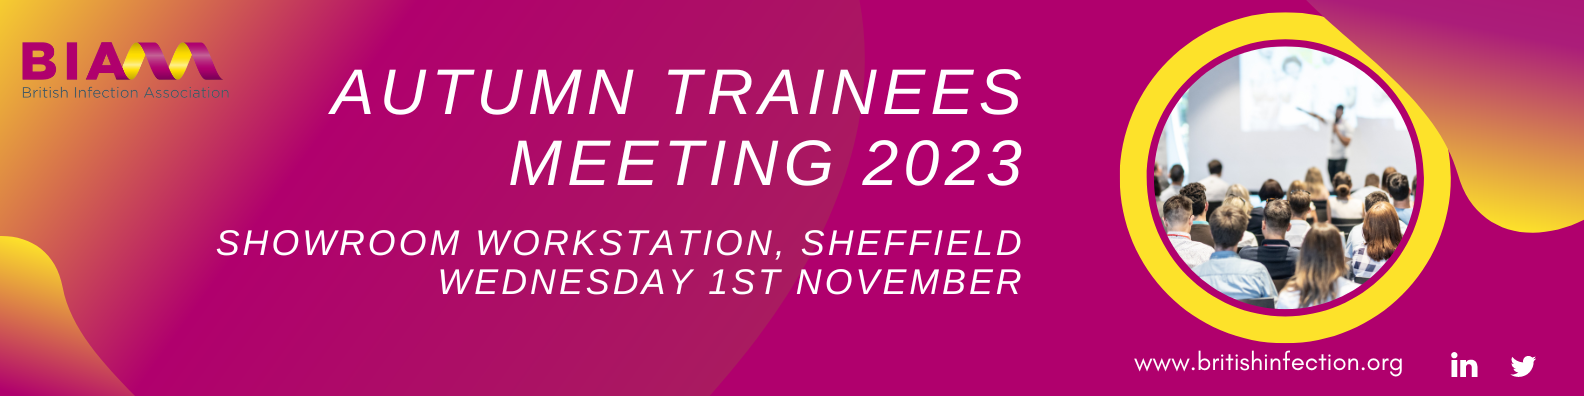 BIA Autumn Trainee Meeting 2023 Banner for website.png